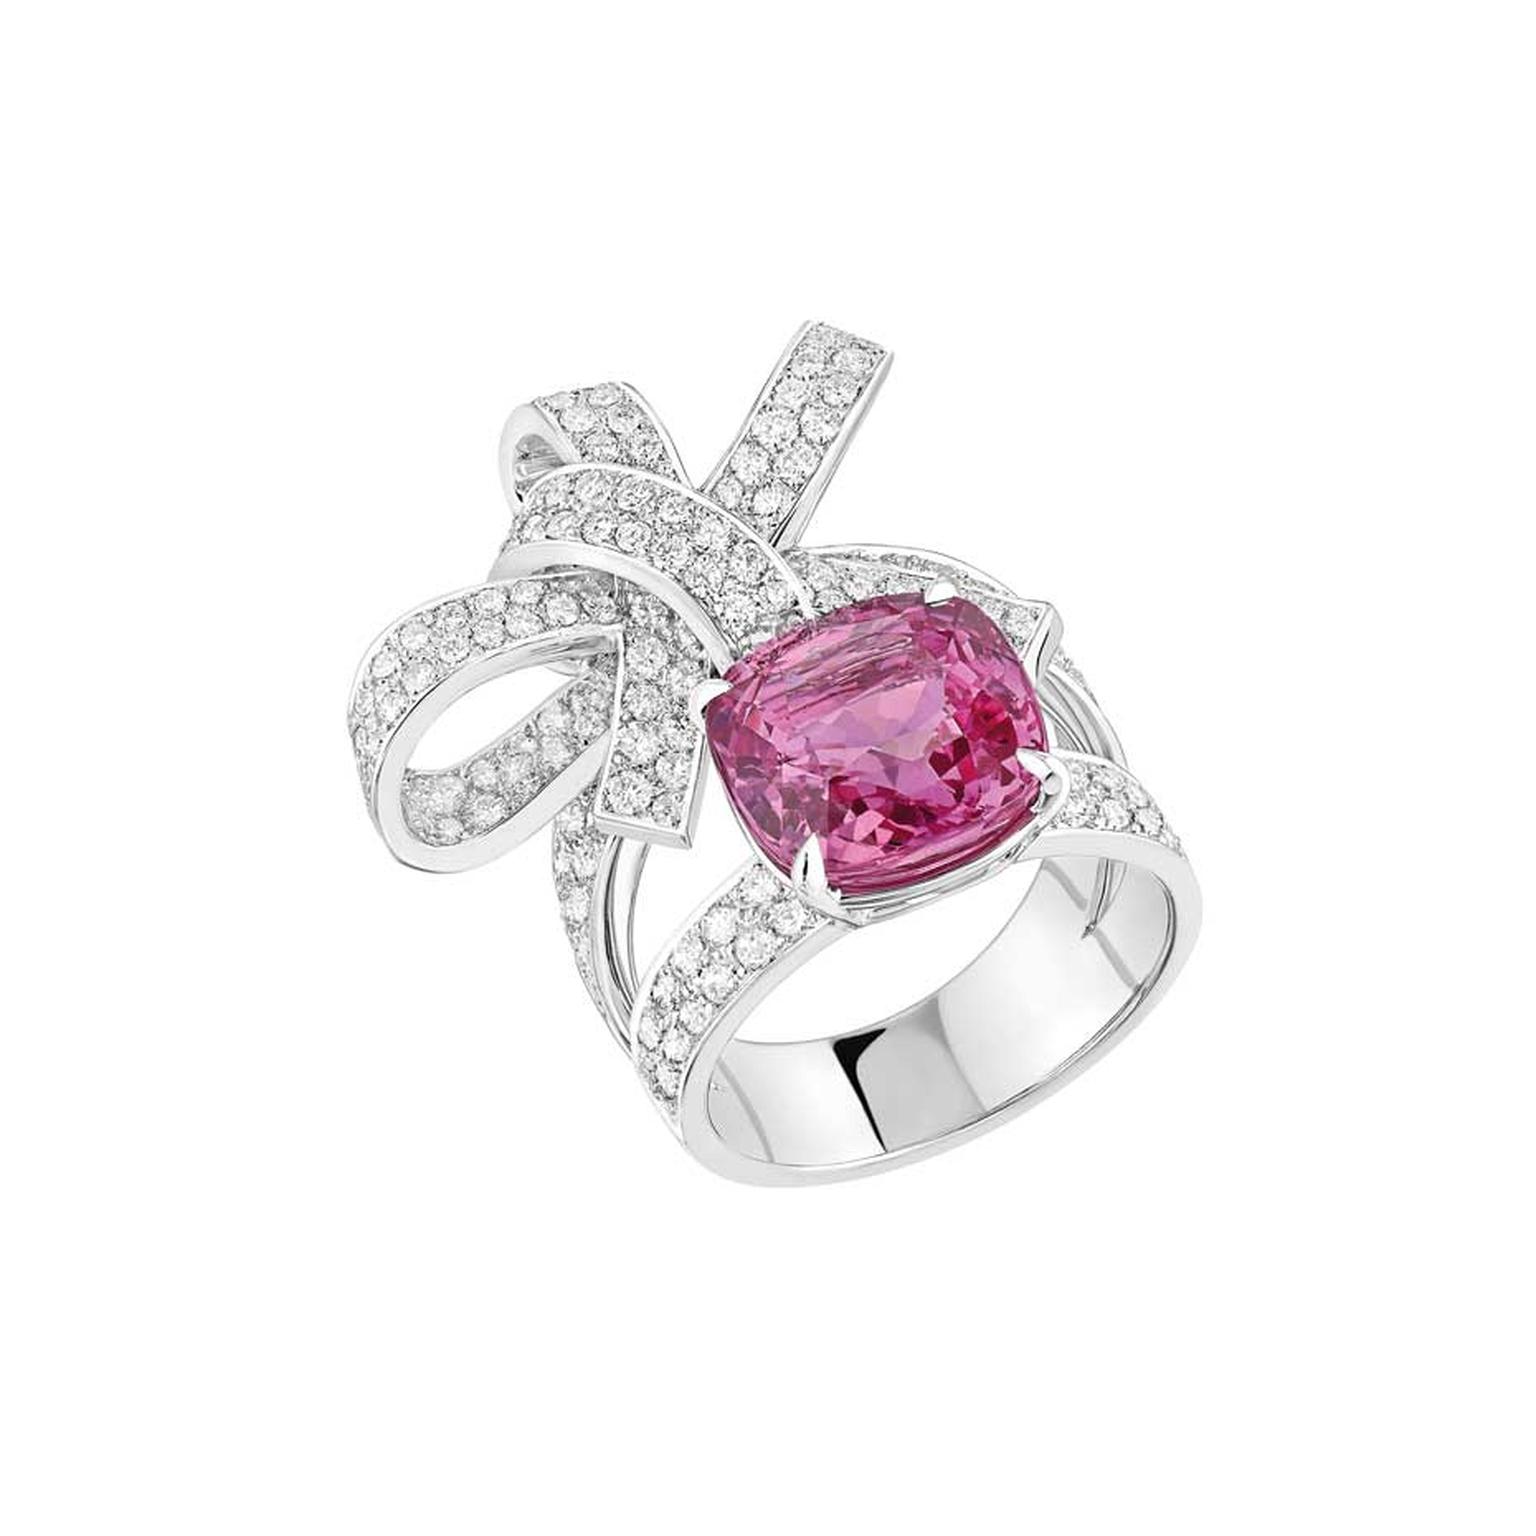 The Chanel Ruban ring is also available with an 8.00ct cushion-cut pink sapphire and 174 brilliant-cut diamonds.